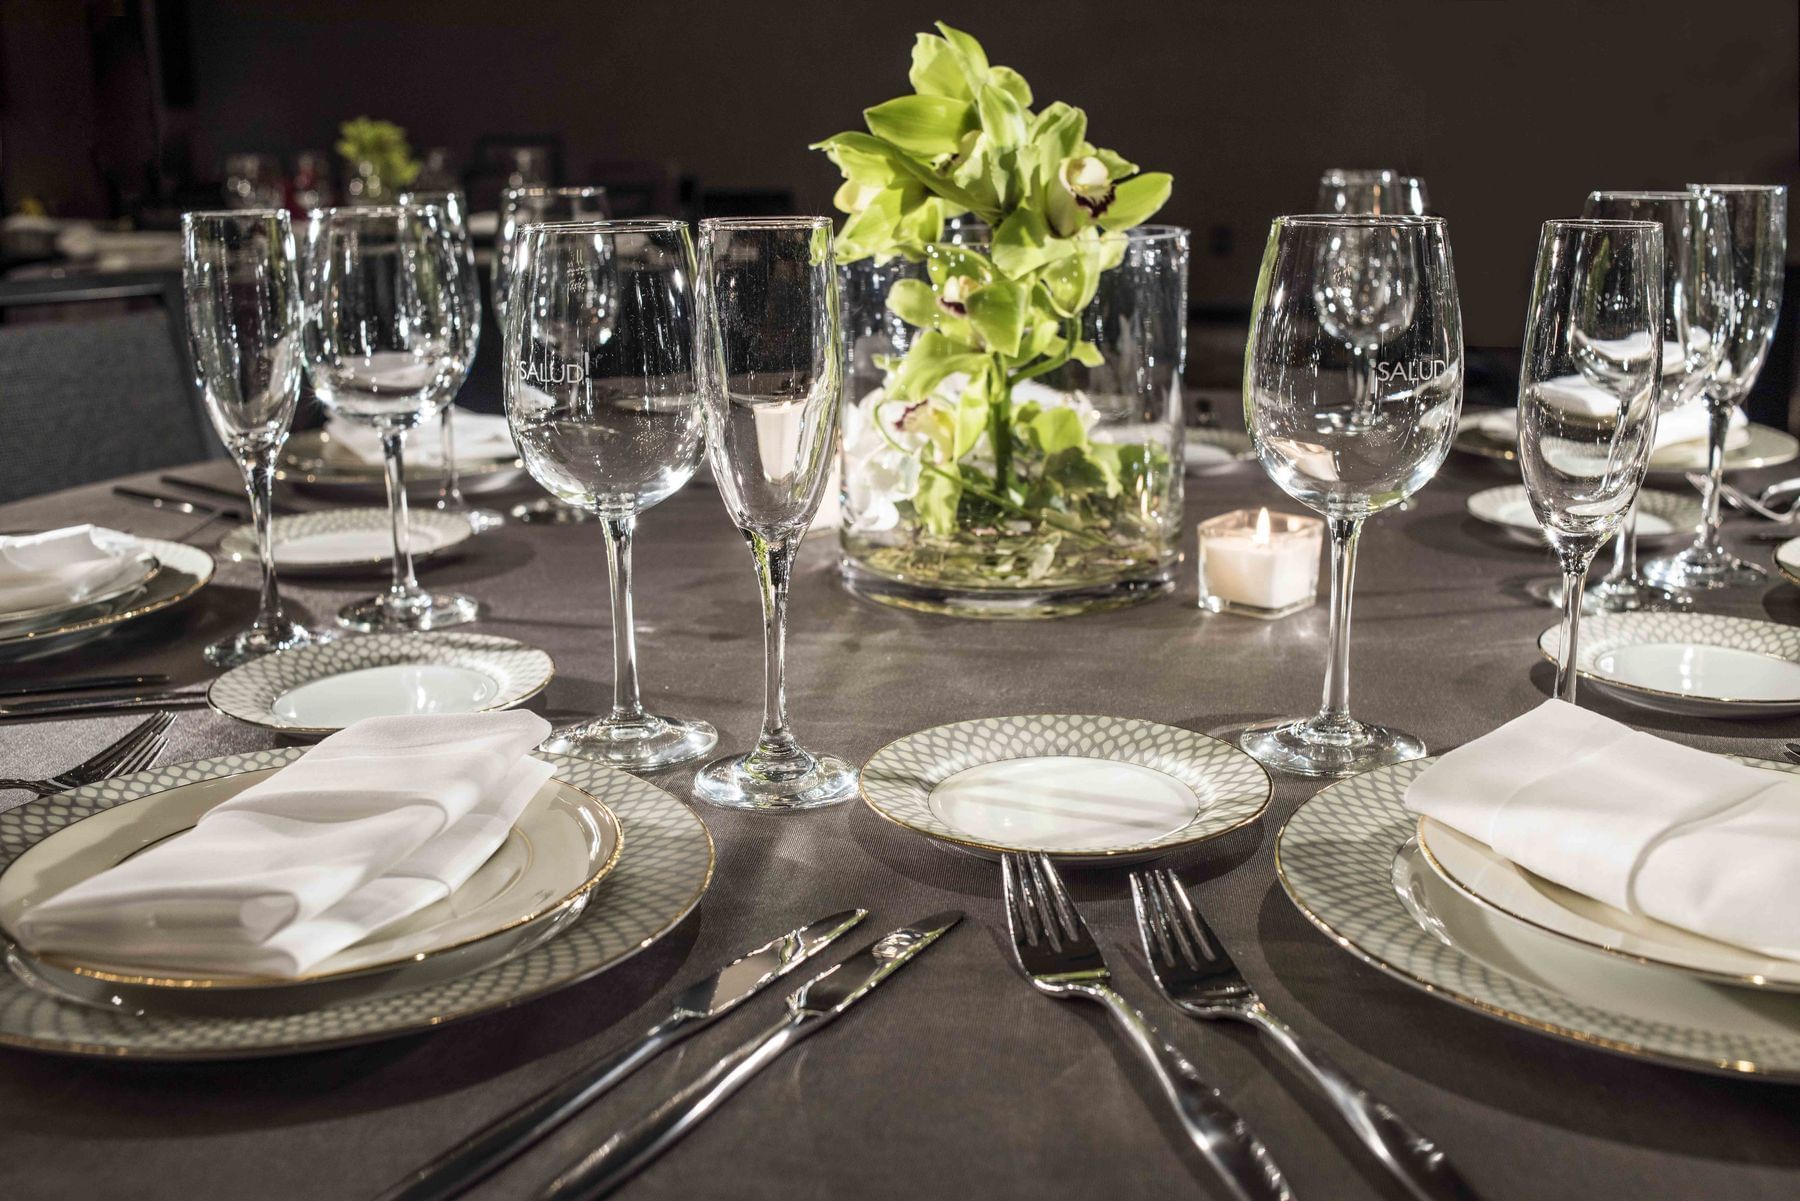 Formal place settings and floral arrangement on banquet table